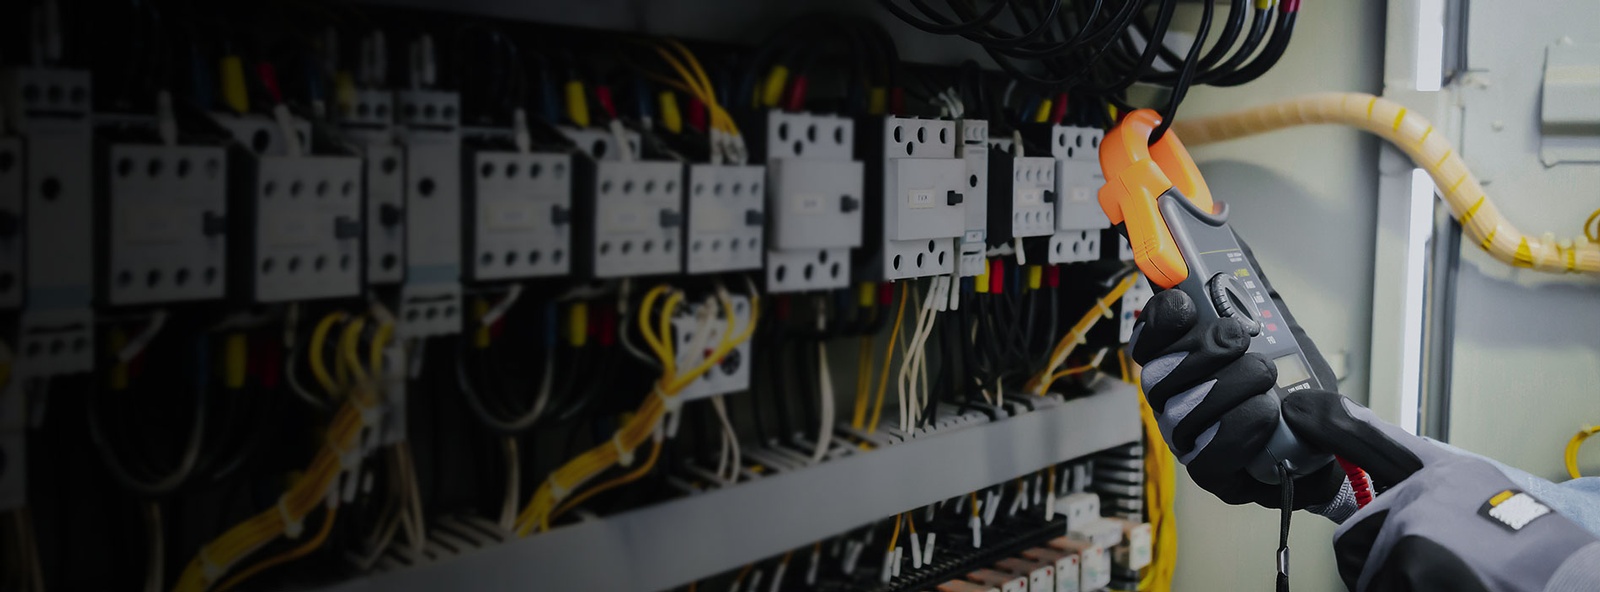 Edmonton Electrical Home Safety Inspection Services